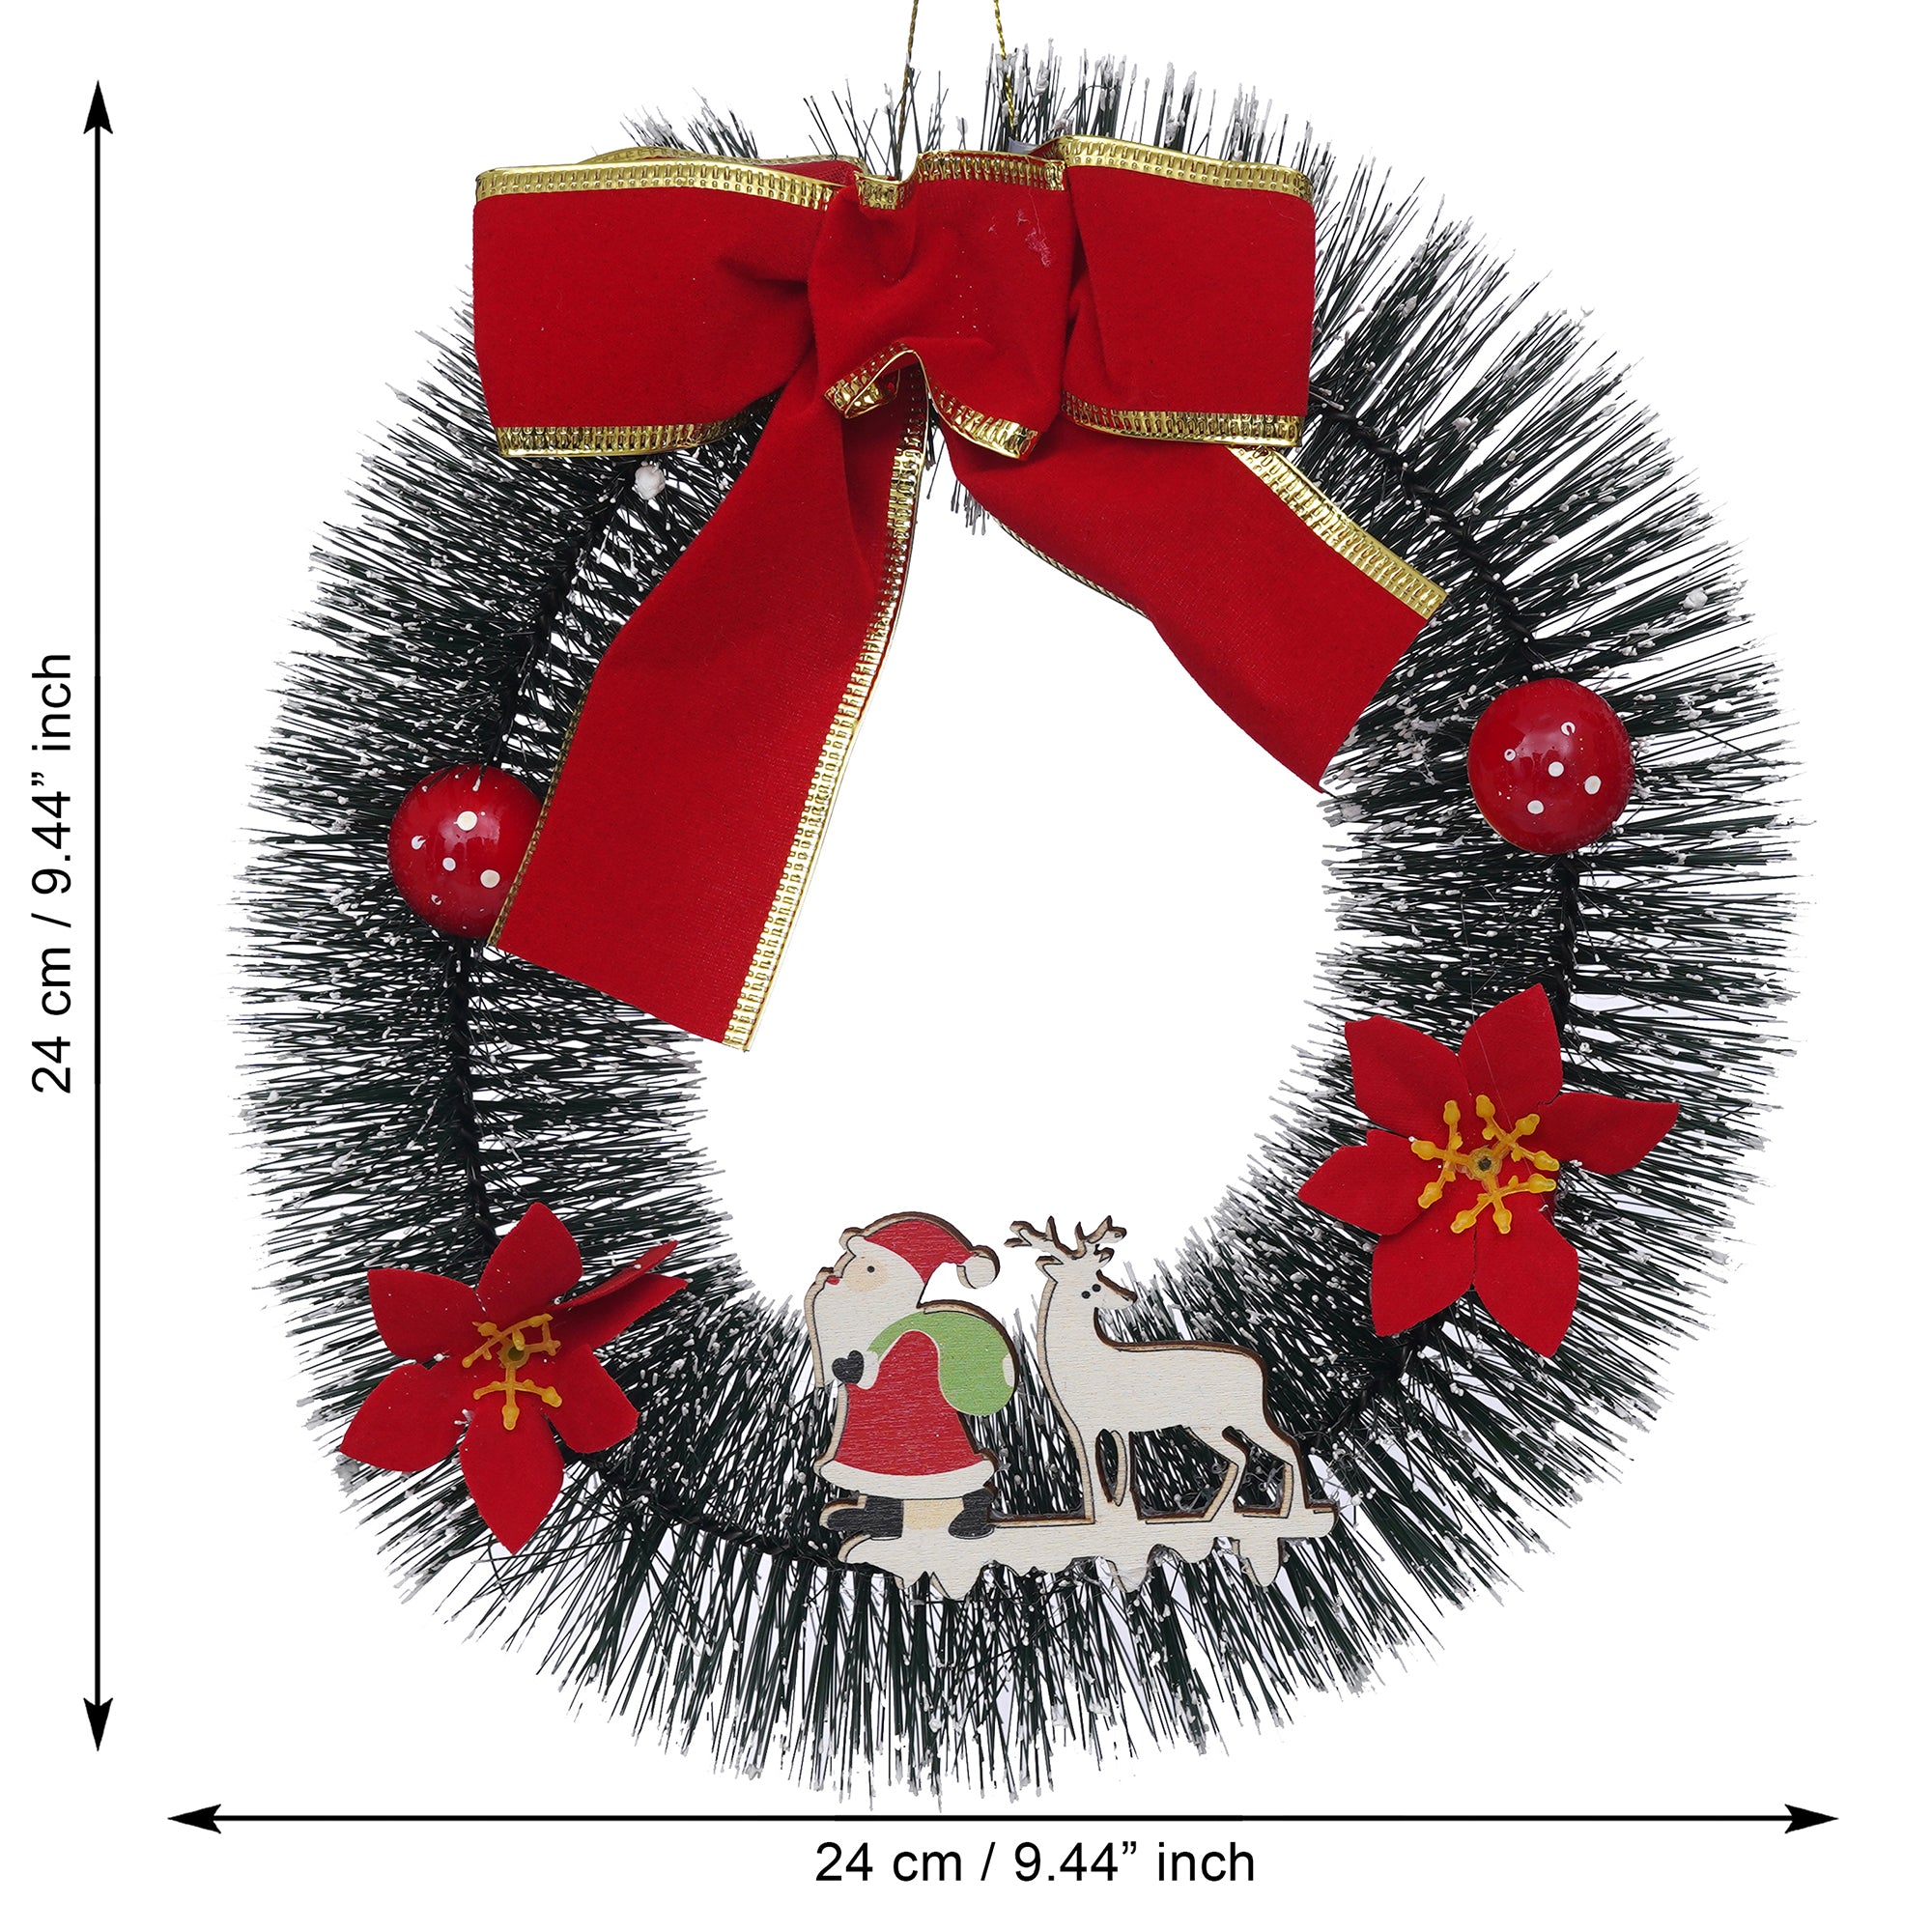 eCraftIndia Christmas Wreath with Santa Claus, Reindeer, Flower, Ball, Ribbon  Christmas Front Door Ornament and Wall Decoration  Artificial Pine Garland For Xmas Party Decor 3